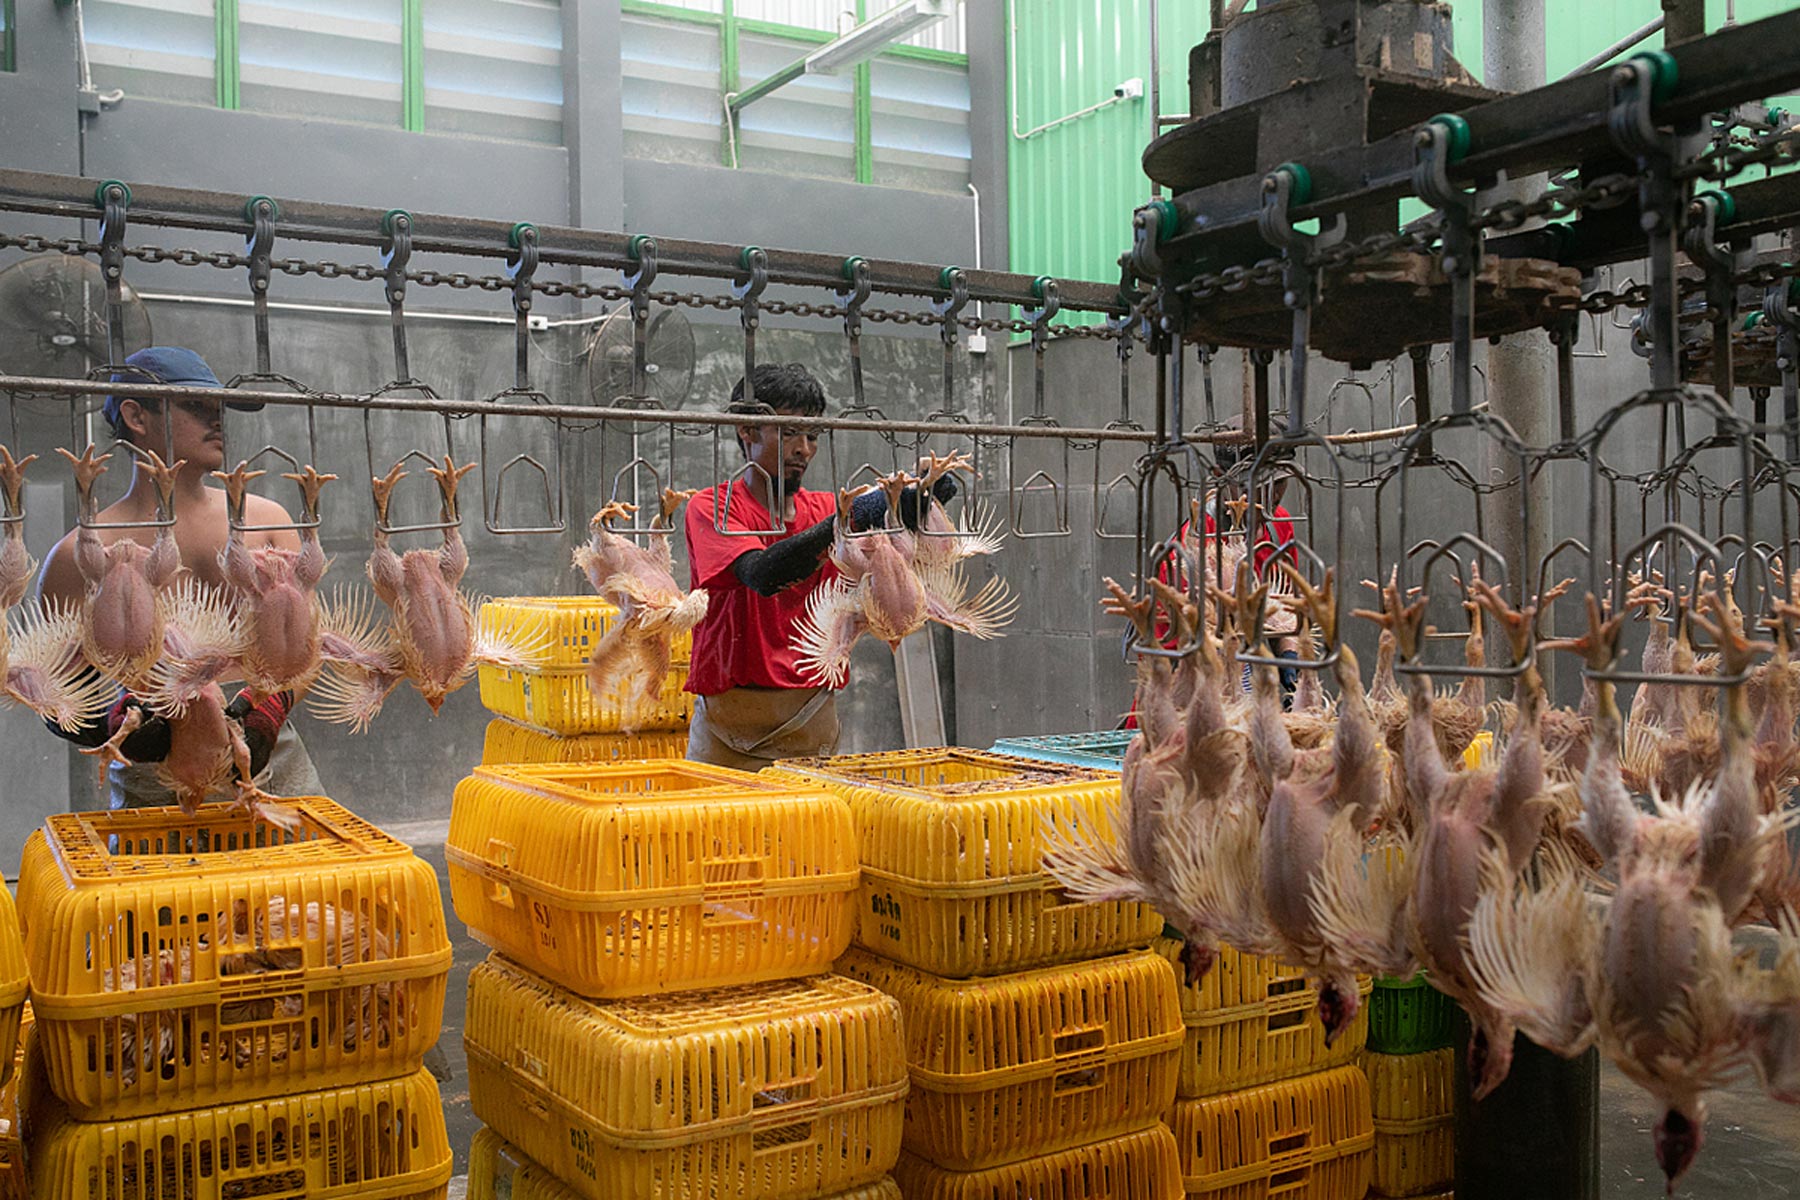 Broiler chickens arrive at the slaughterhouse in plastic containers from which workers remove them and shackle them to a conveyor belt.